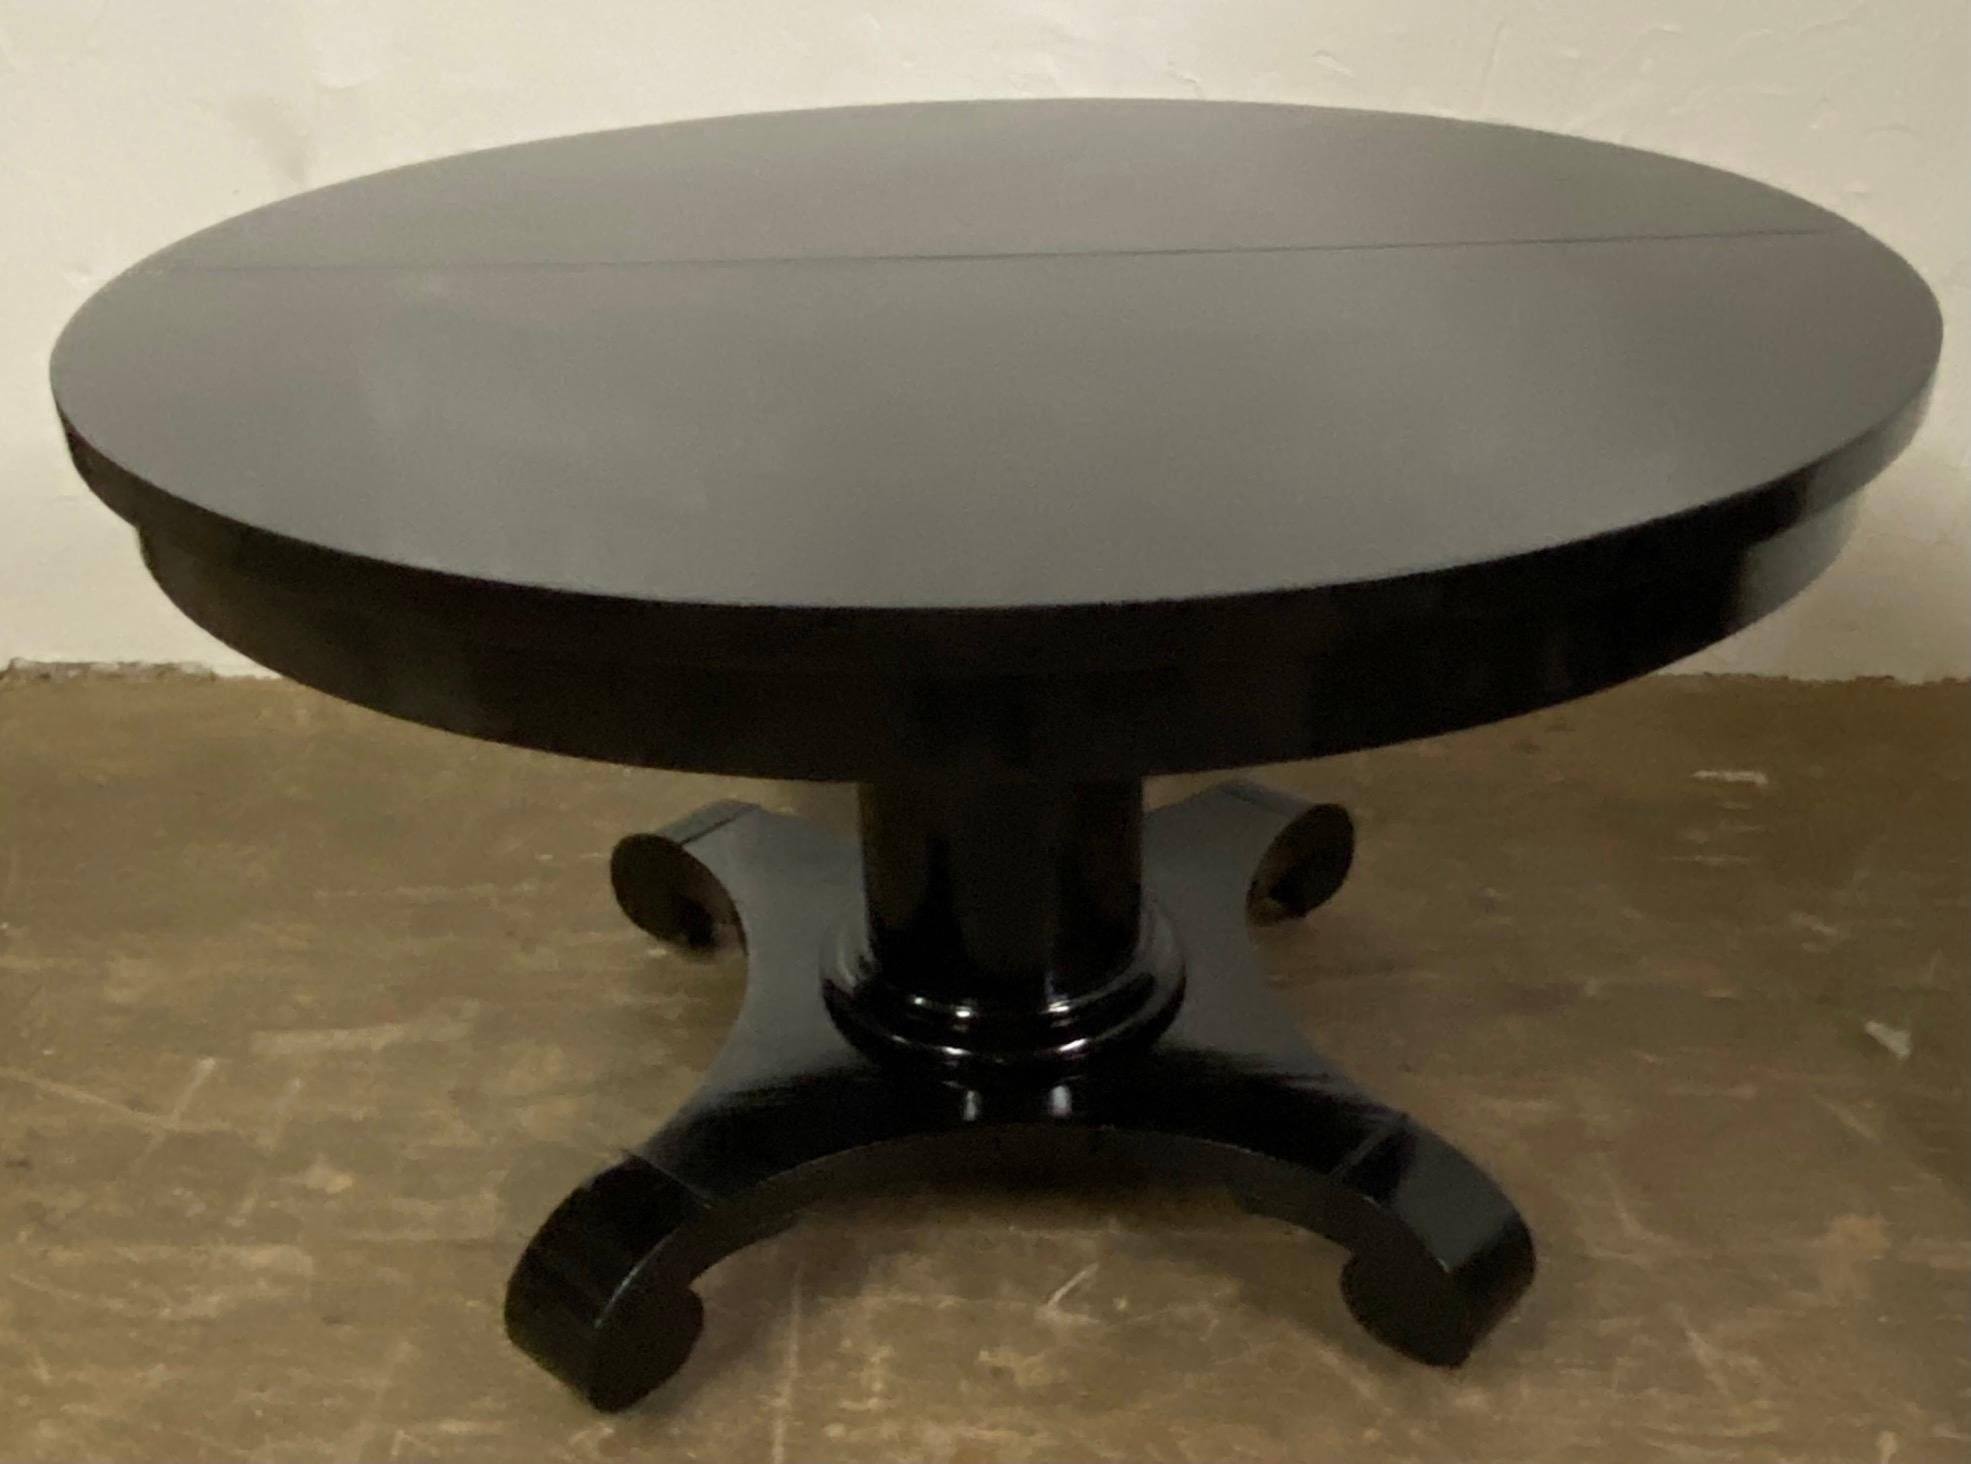 A handsome round black Regency style center pedestal dining table.
The round American Empire has four scrolled feet on wheels attached to a center pedestal. The table has been refinished in ebony black with a lacquered top. Although the table can